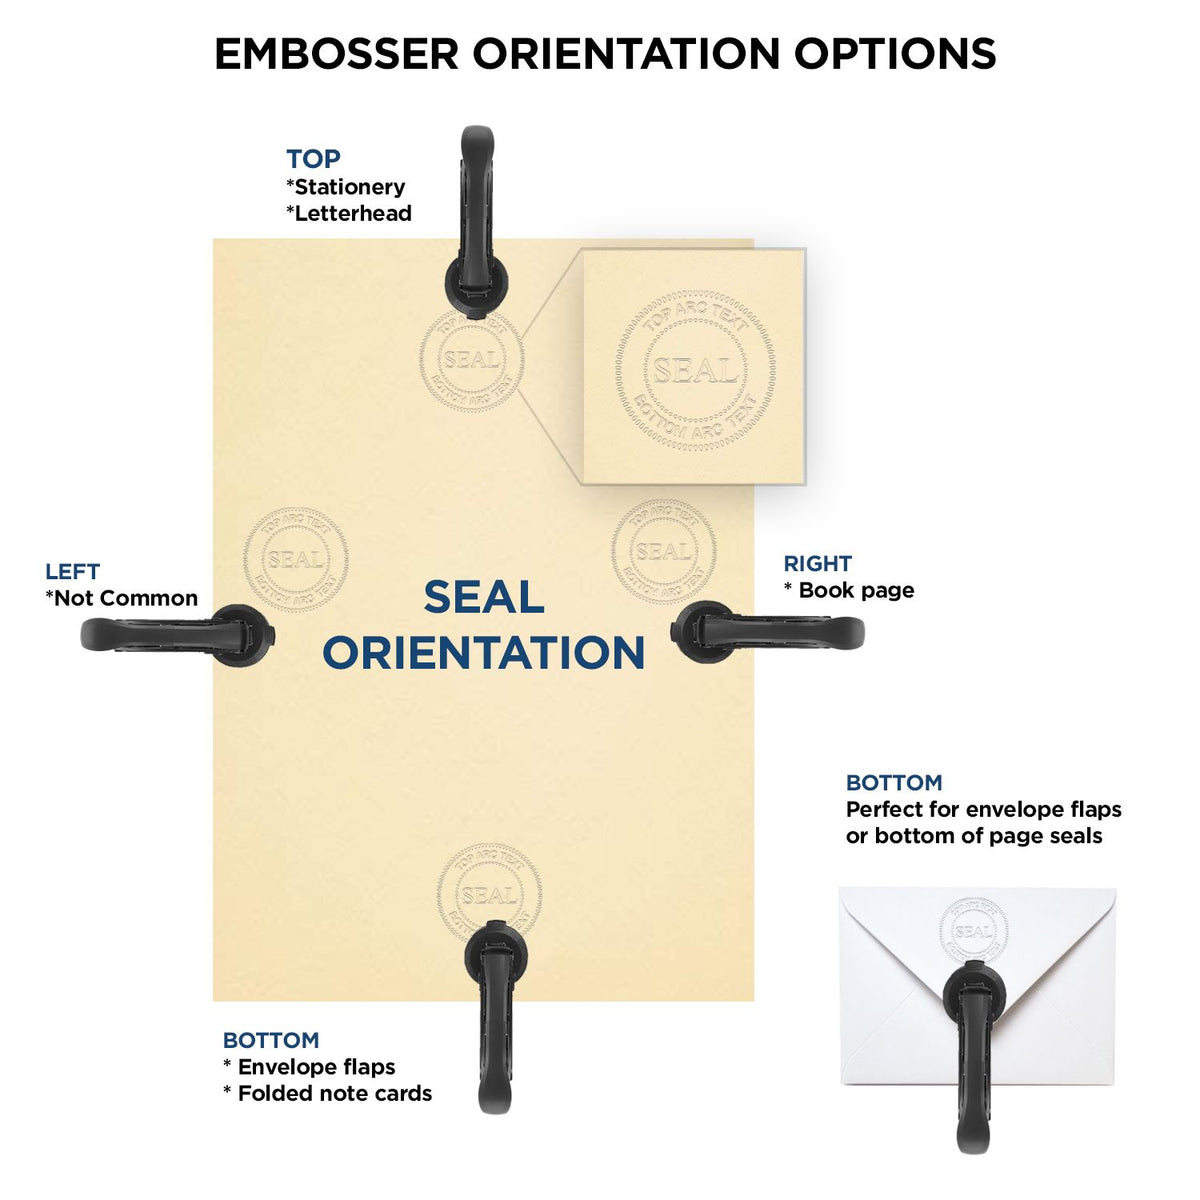 An infographic for the Heavy Duty Cast Iron Arkansas Engineer Seal Embosser showing embosser orientation, this is showing examples of a top, bottom, right and left insert.